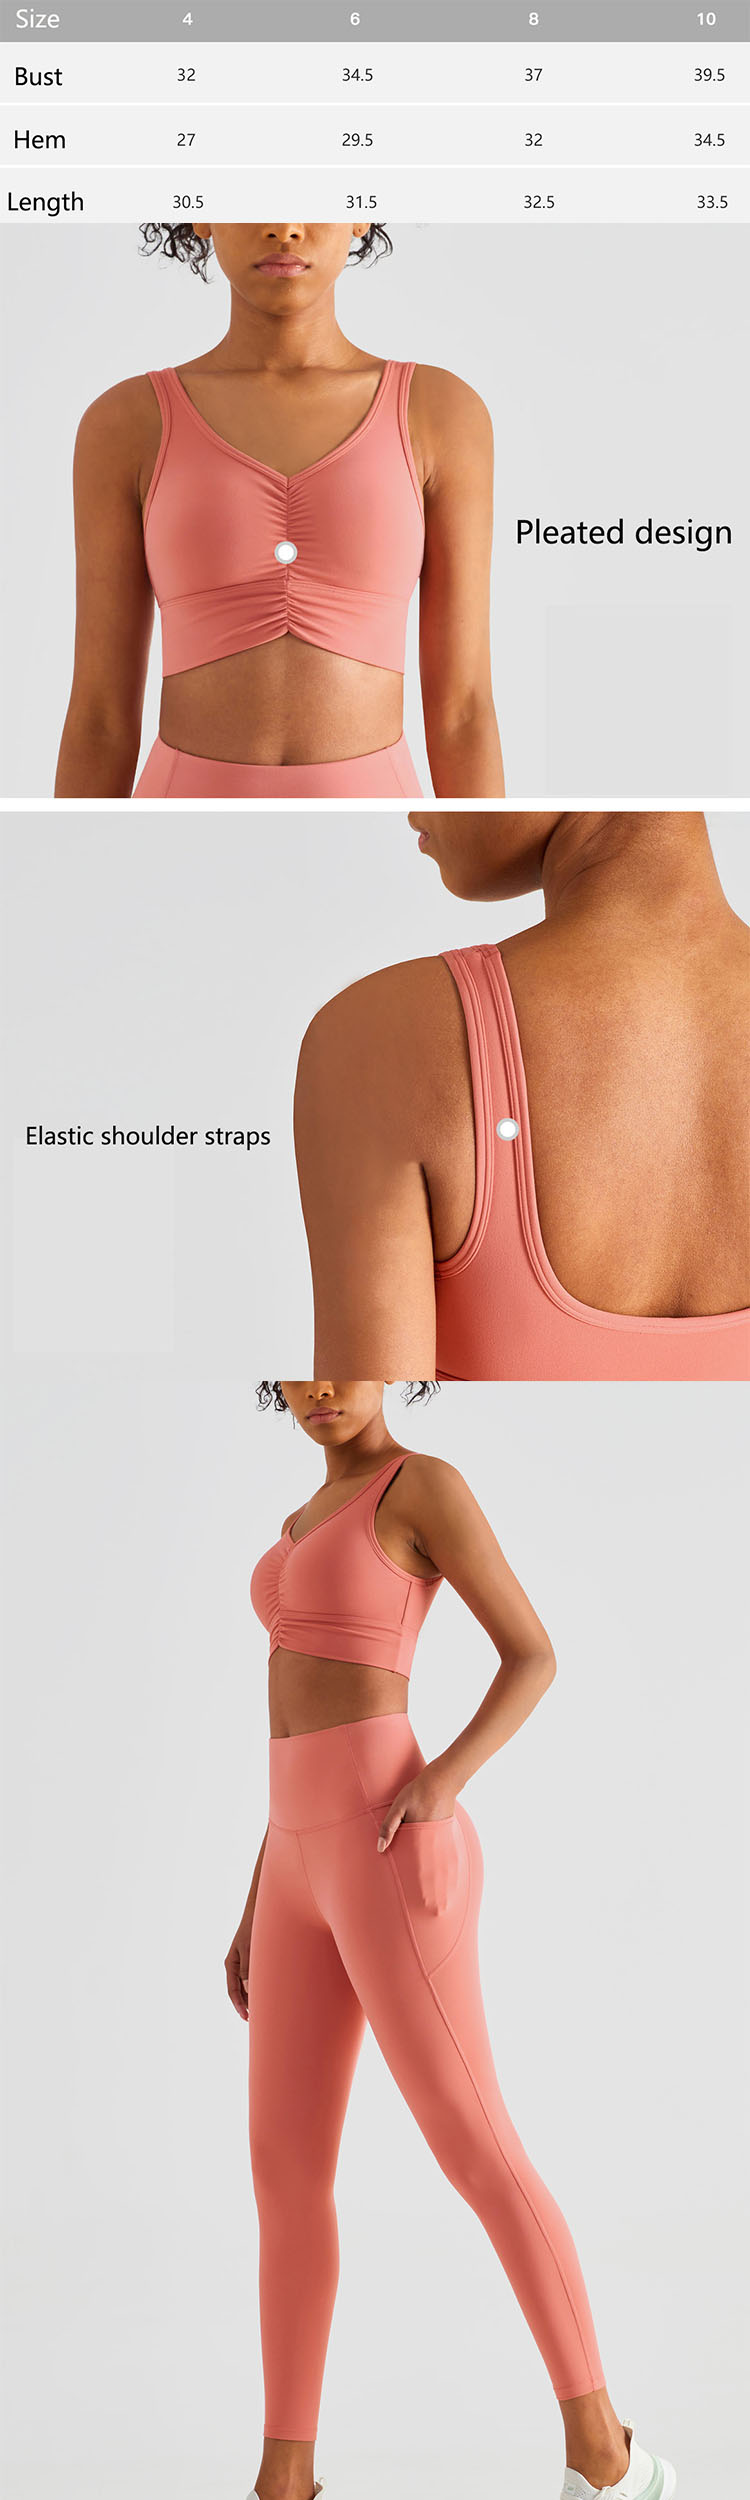 Women in sports bras design is different from the usual trend of broken pleats